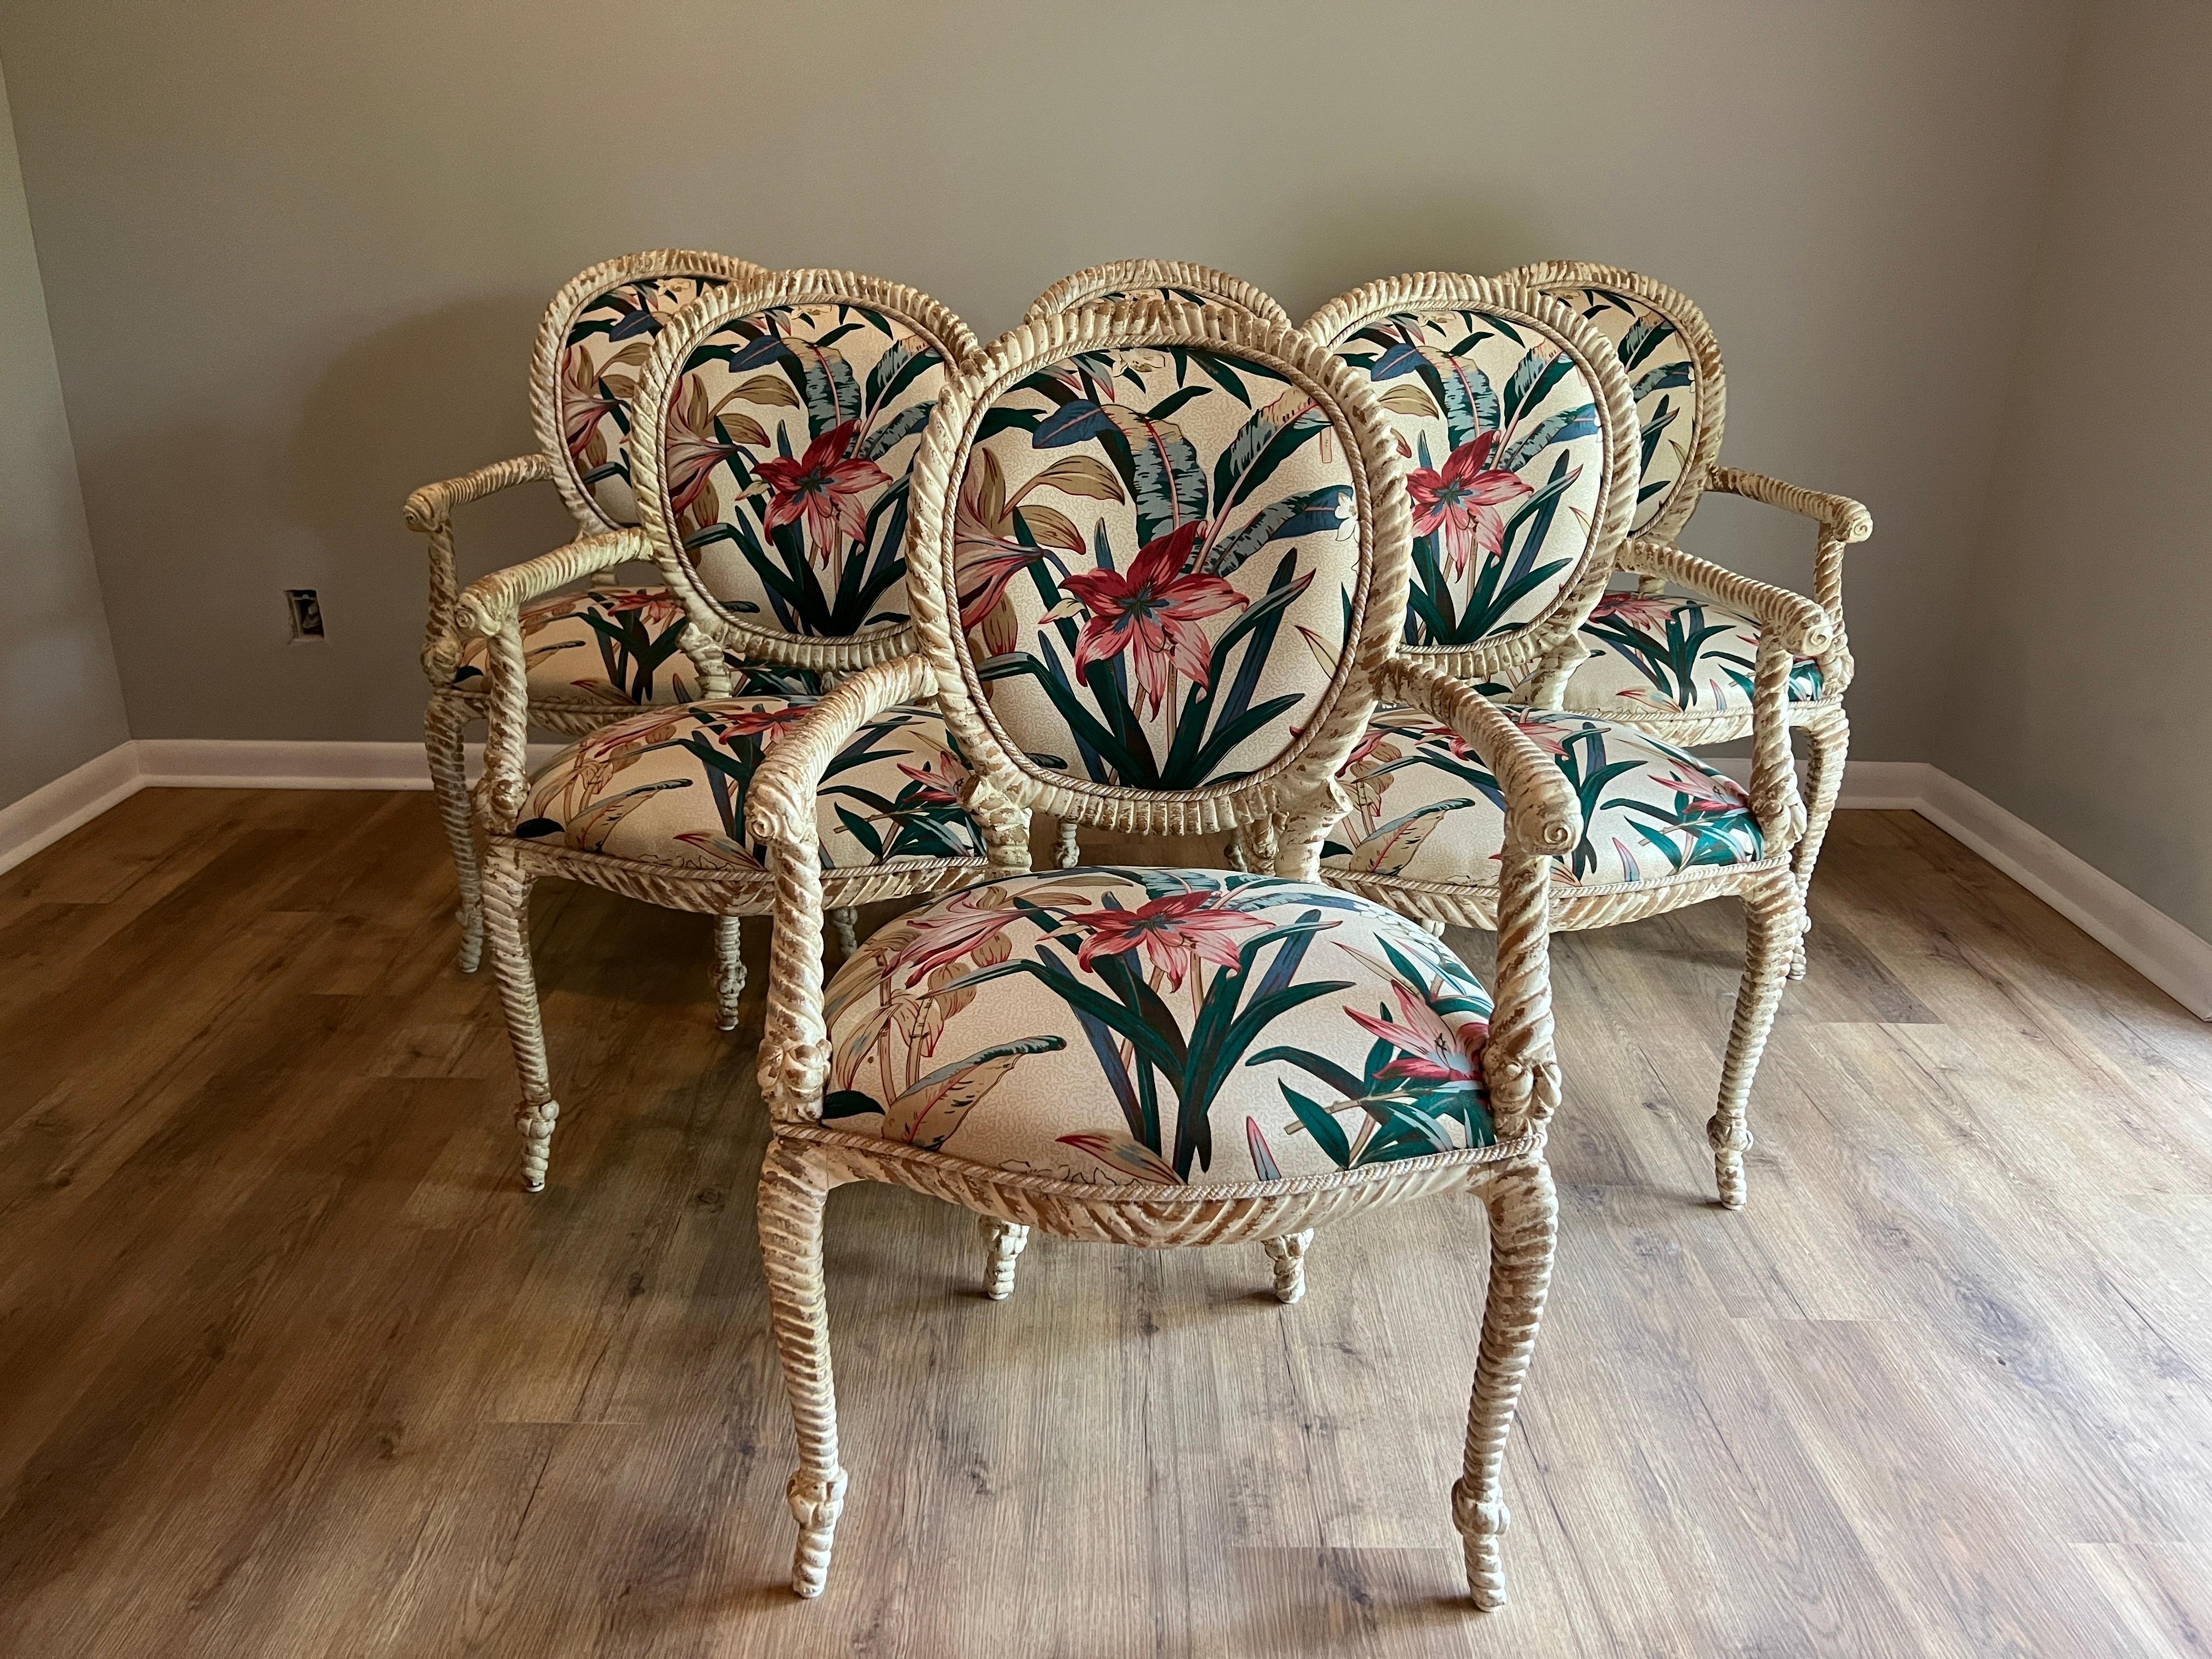 Likely Italian, 20th century. A grouping of beautifully carved faux bois armchairs with a distressed white paint finish. Stunning appearance and sturdy.
Sold in Pairs. Will happily discount for multiple sets.